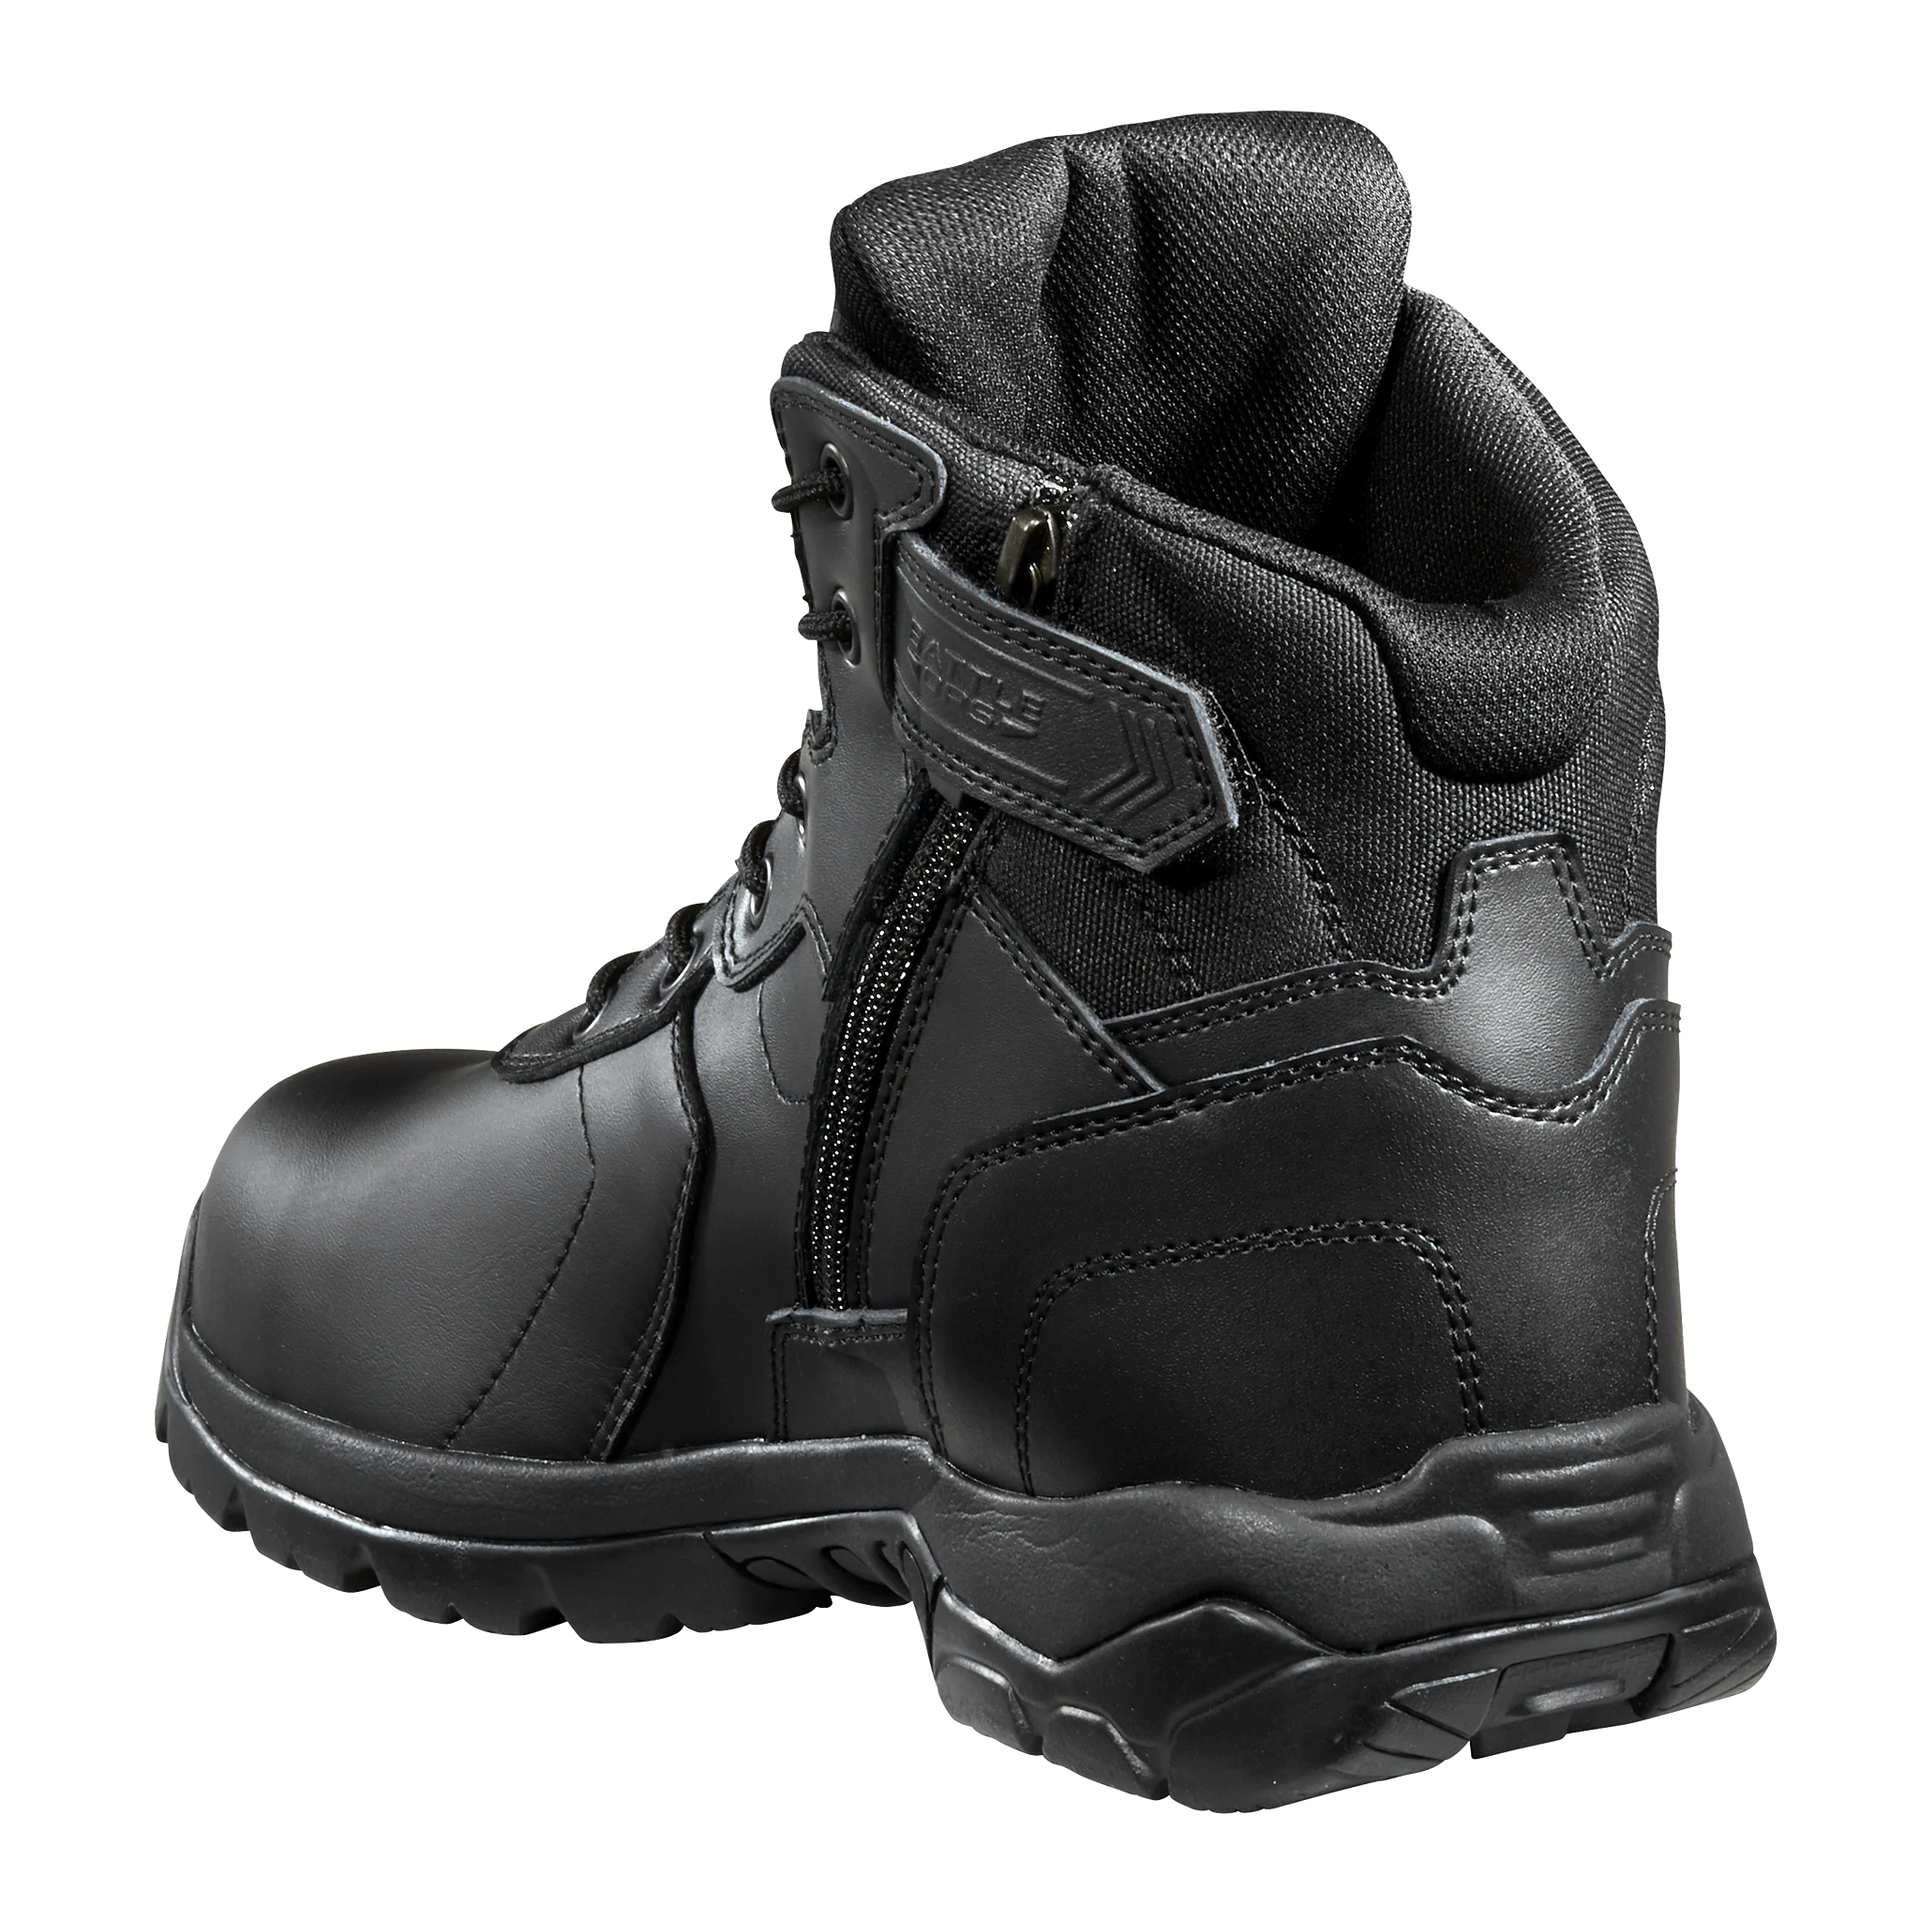 Black Diamond, 6" Waterproof Tactical Boot- Side Zip Comp Safety Toe | Fuego Fire Center | Firefighter GearBlack Diamond, 6" Waterproof Tactical Boot- Side Zip Comp Safety Toe | The Fire Center | The Fire Store | Store | Fuego Fire Center | Firefighter Gear | Our men's waterproof YKK side zip tactical boot with composite safety toe is light and flexible. The EVA mid-sole provides shock absorbing comfort while the fiberglass shank offers support and torsional rigidity